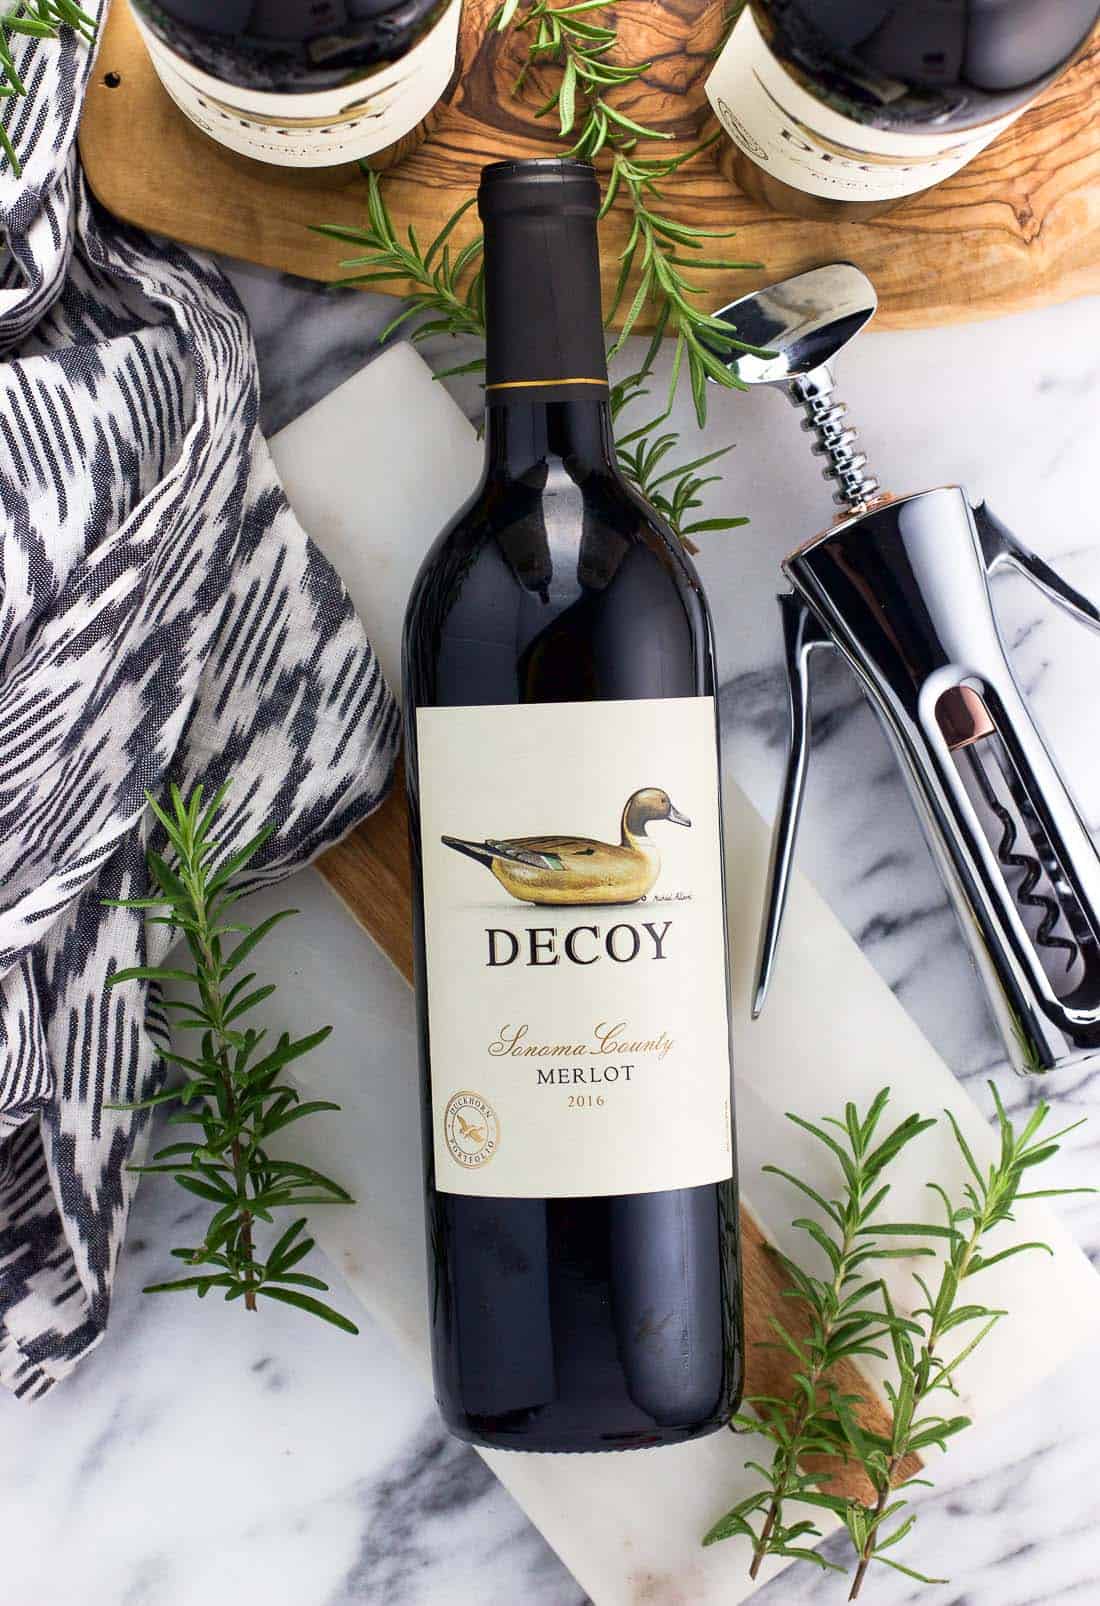 An overhead shot of a bottle of Decoy Merlot, surrounded by two more bottles, a metal wine opener, and rosemary sprigs